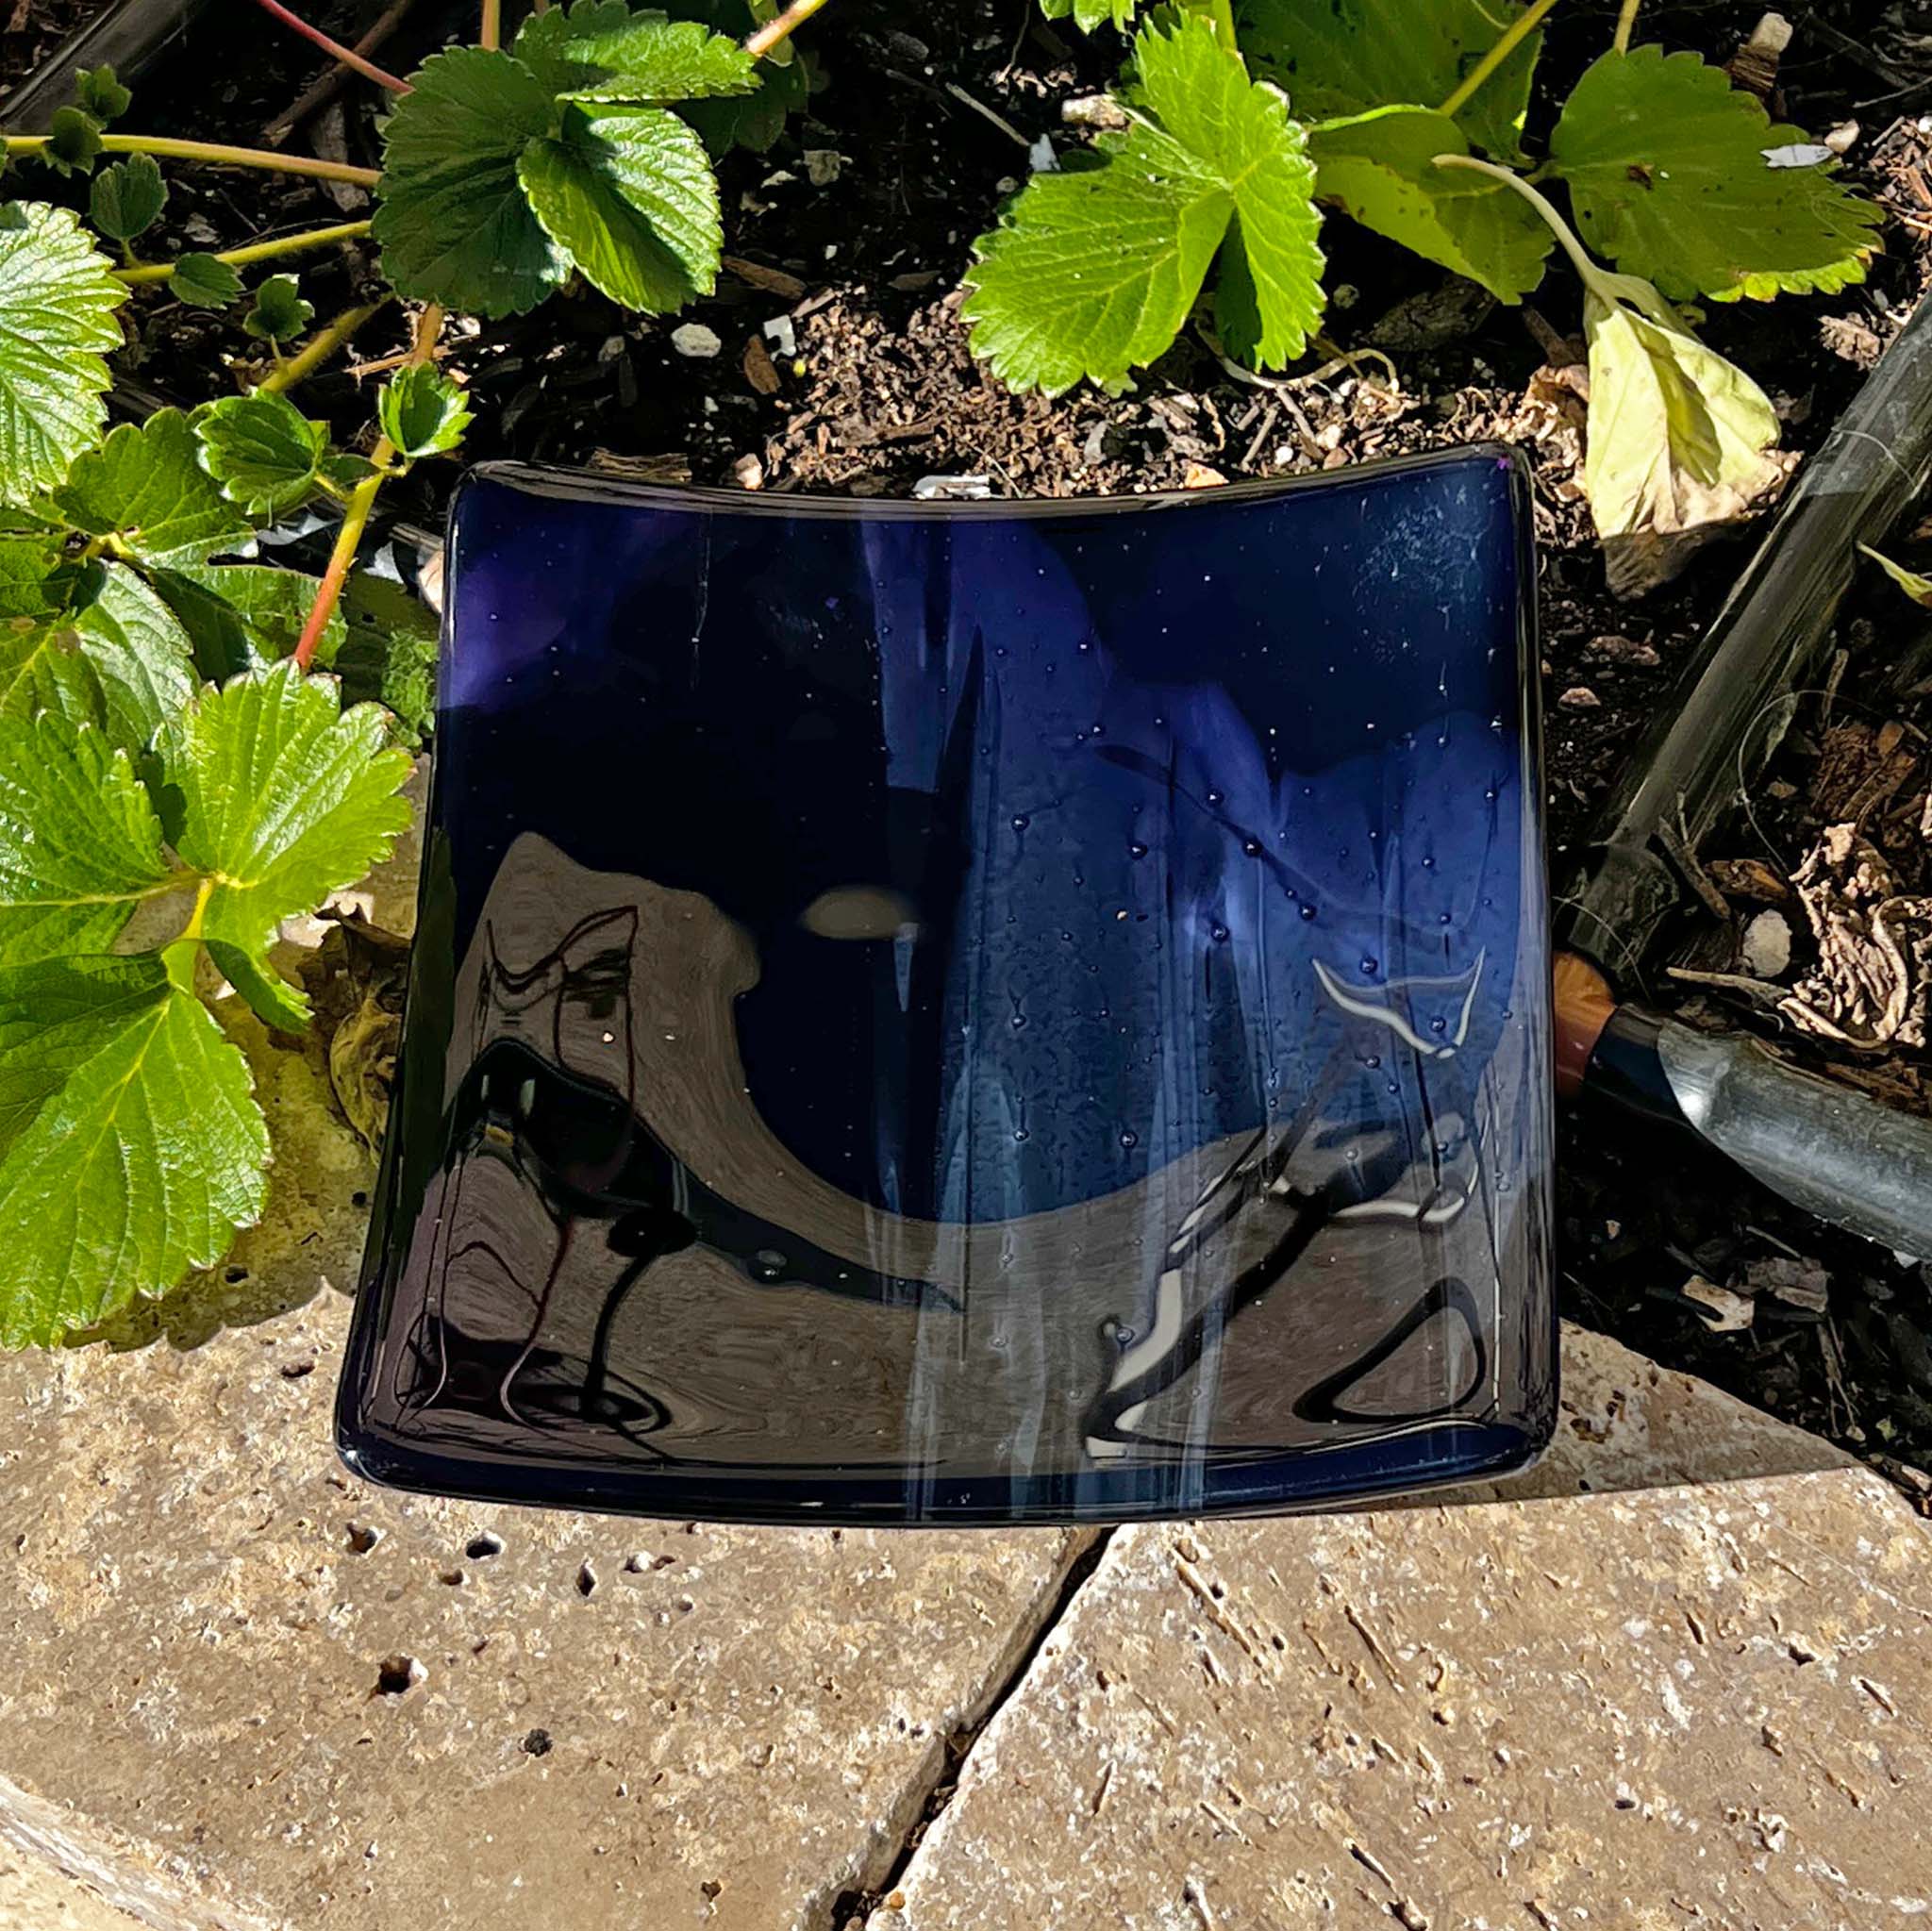 Deep purple glass dish, six inches square, resting on pavers in strawberry garden.